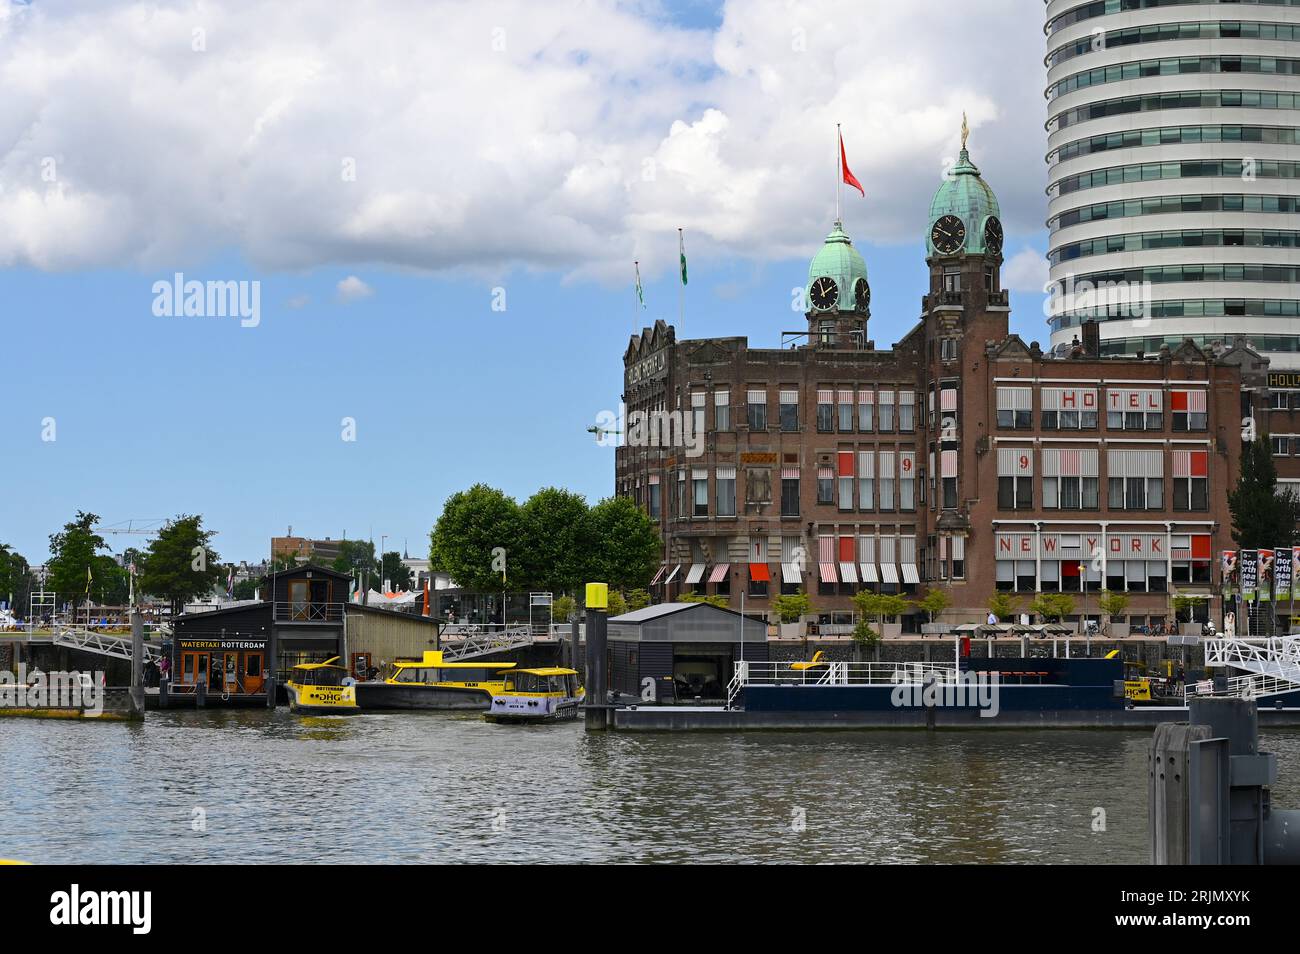 Hotel NewYork at the Koninginnenhoofd on the Kop van Zuid in Rotterdam. A jetty location for water taxis in front Stock Photo